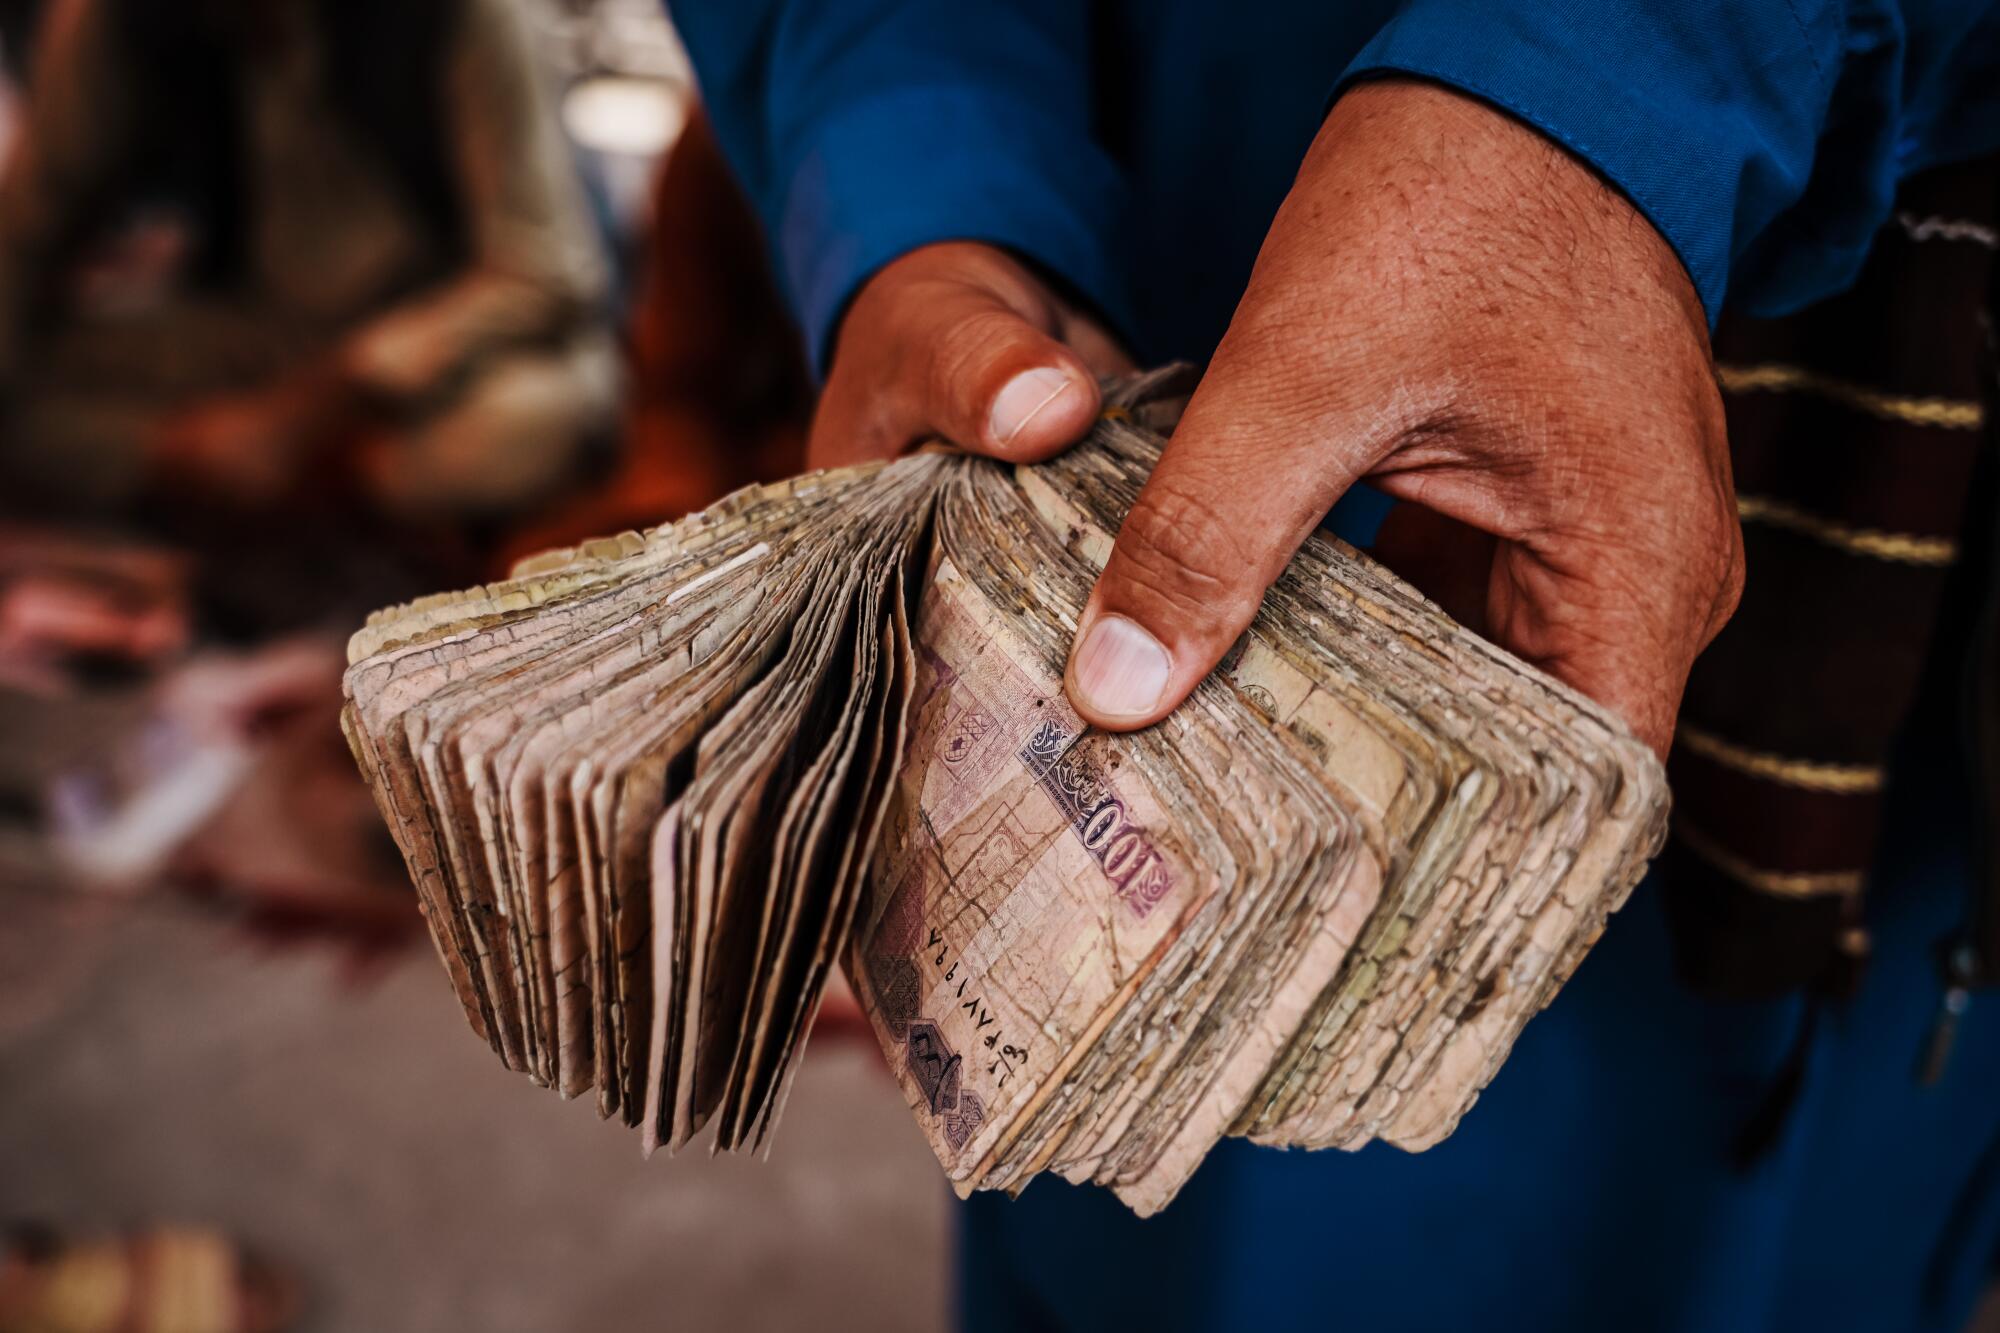 Hands hold a wad of Afghan cash 